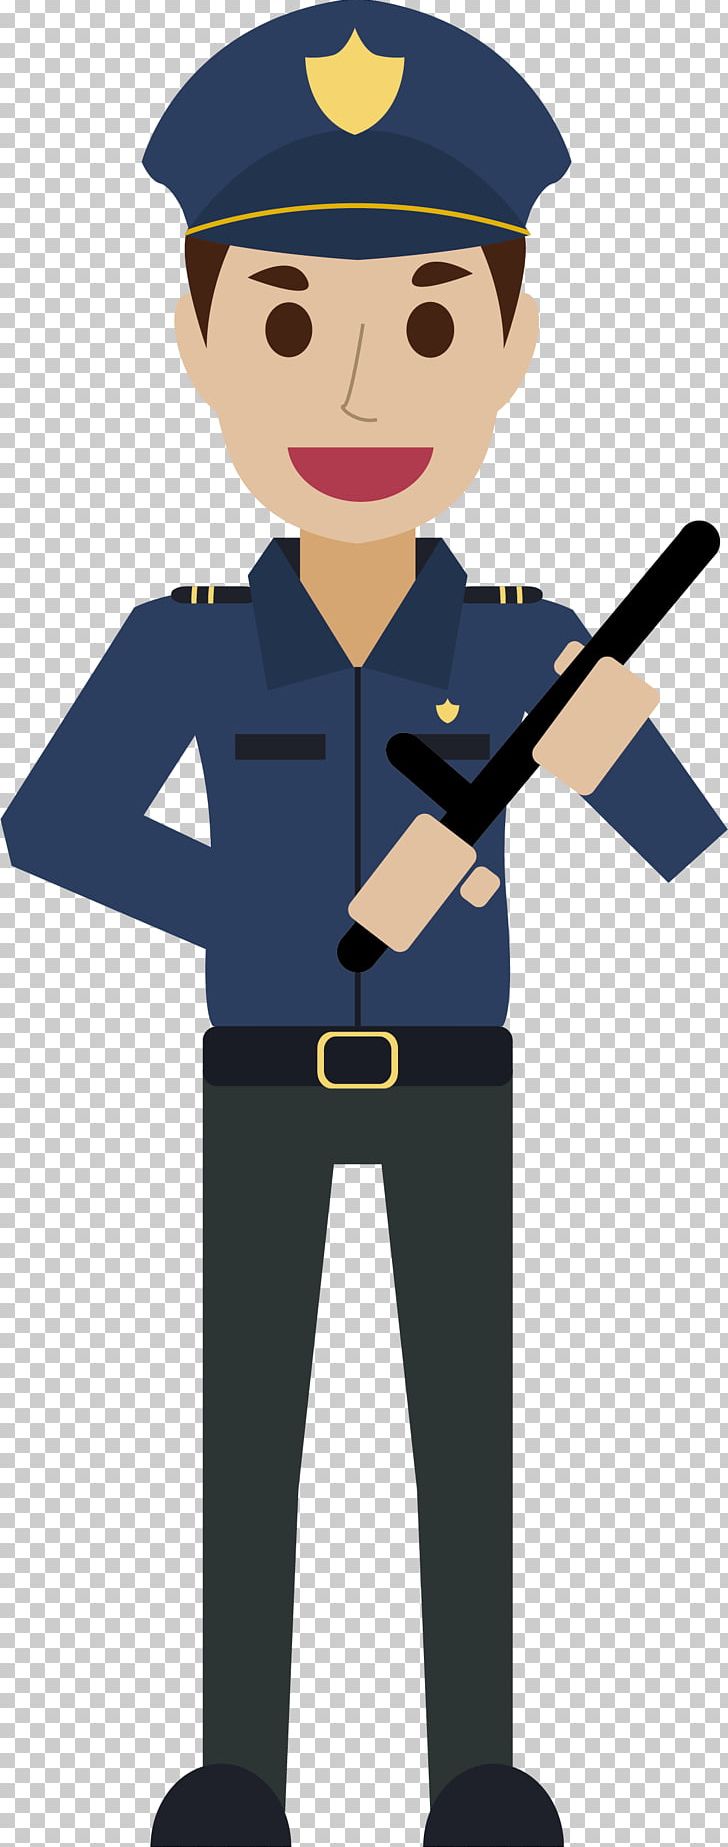 Police Officer Public Security PNG, Clipart, Academician, Baton, Batons, Cartoon, Euclidean Vector Free PNG Download